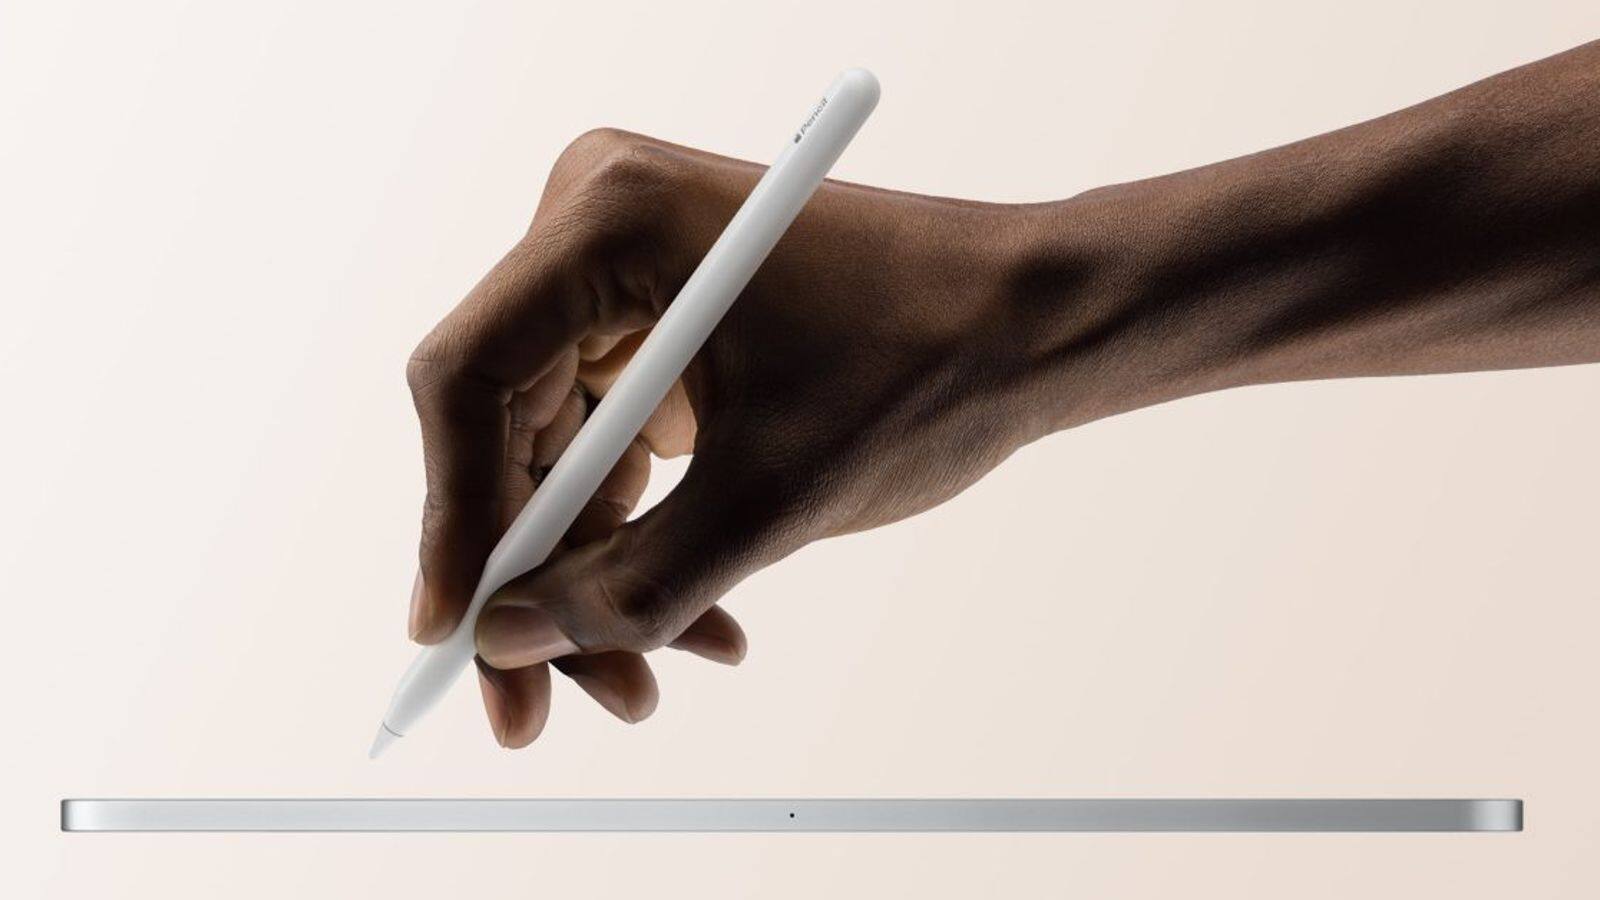 New Apple Pencil to feature haptic feedback and gestures